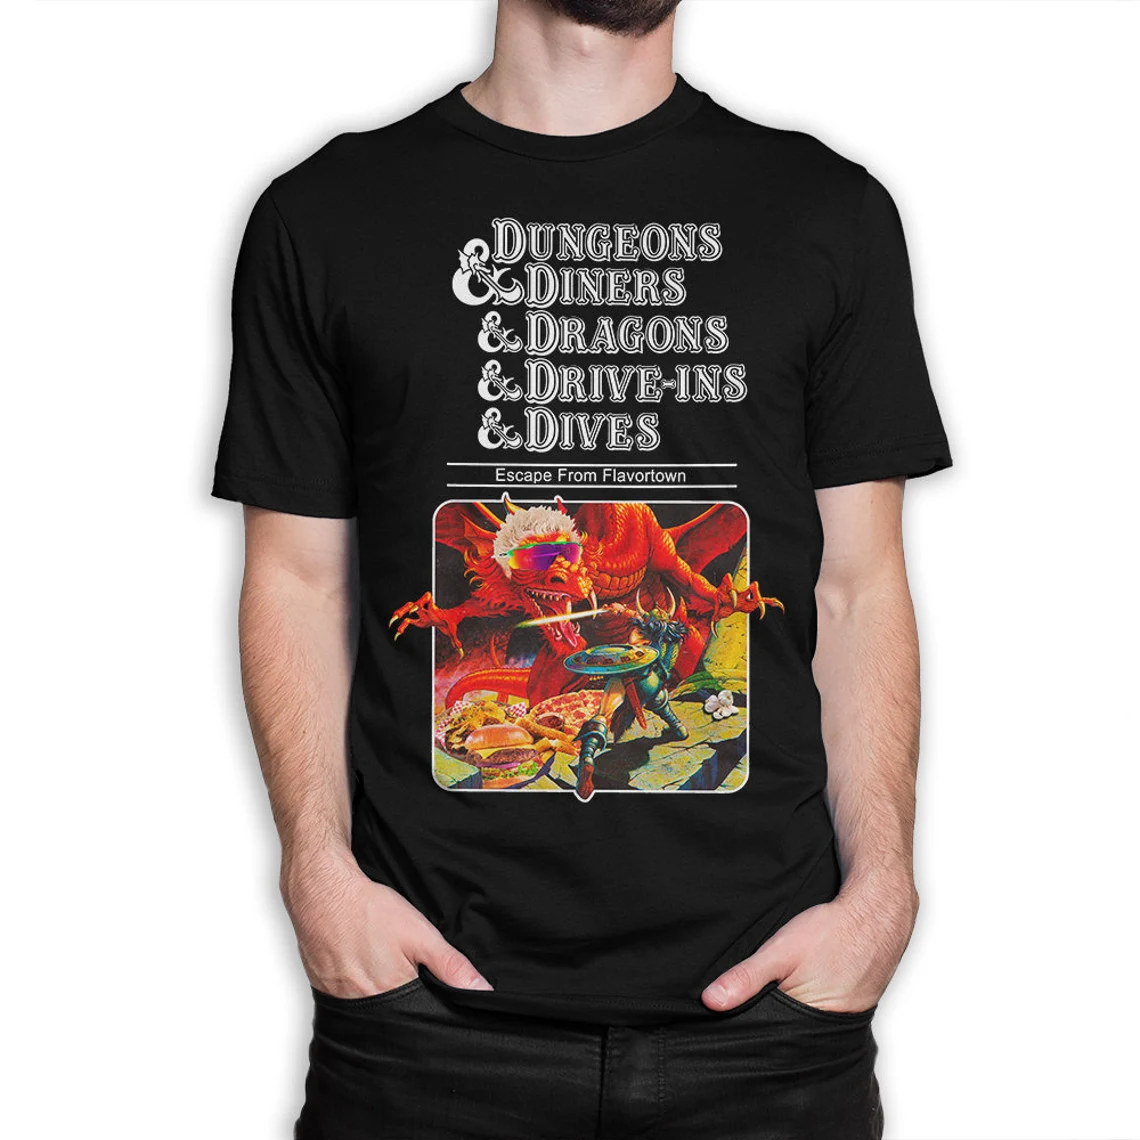 photo of a shirt that says "Dungeons & Diners & Dragons & Drive-Ins & Dives: Escape from Flavortown" and below the text is a picture of Guy Fieri as a dragon